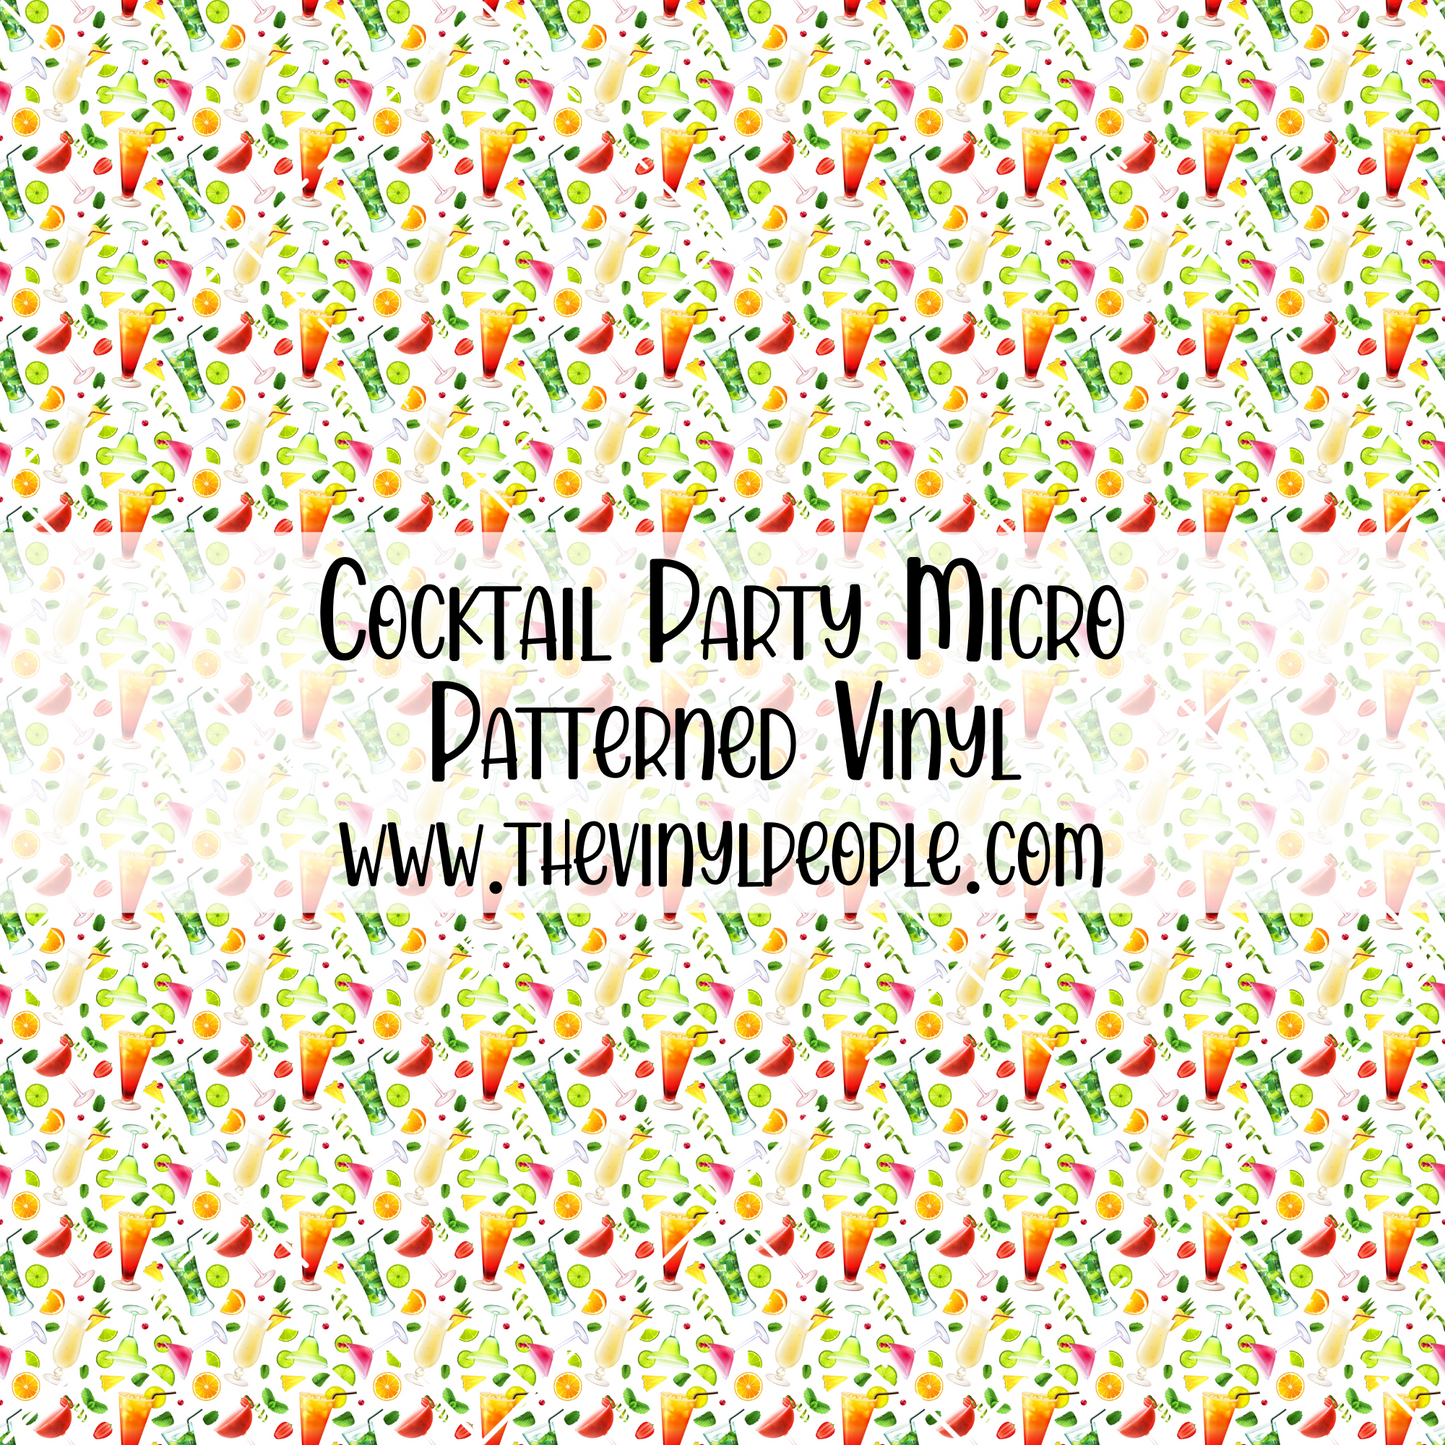 Cocktail Party Patterned Vinyl